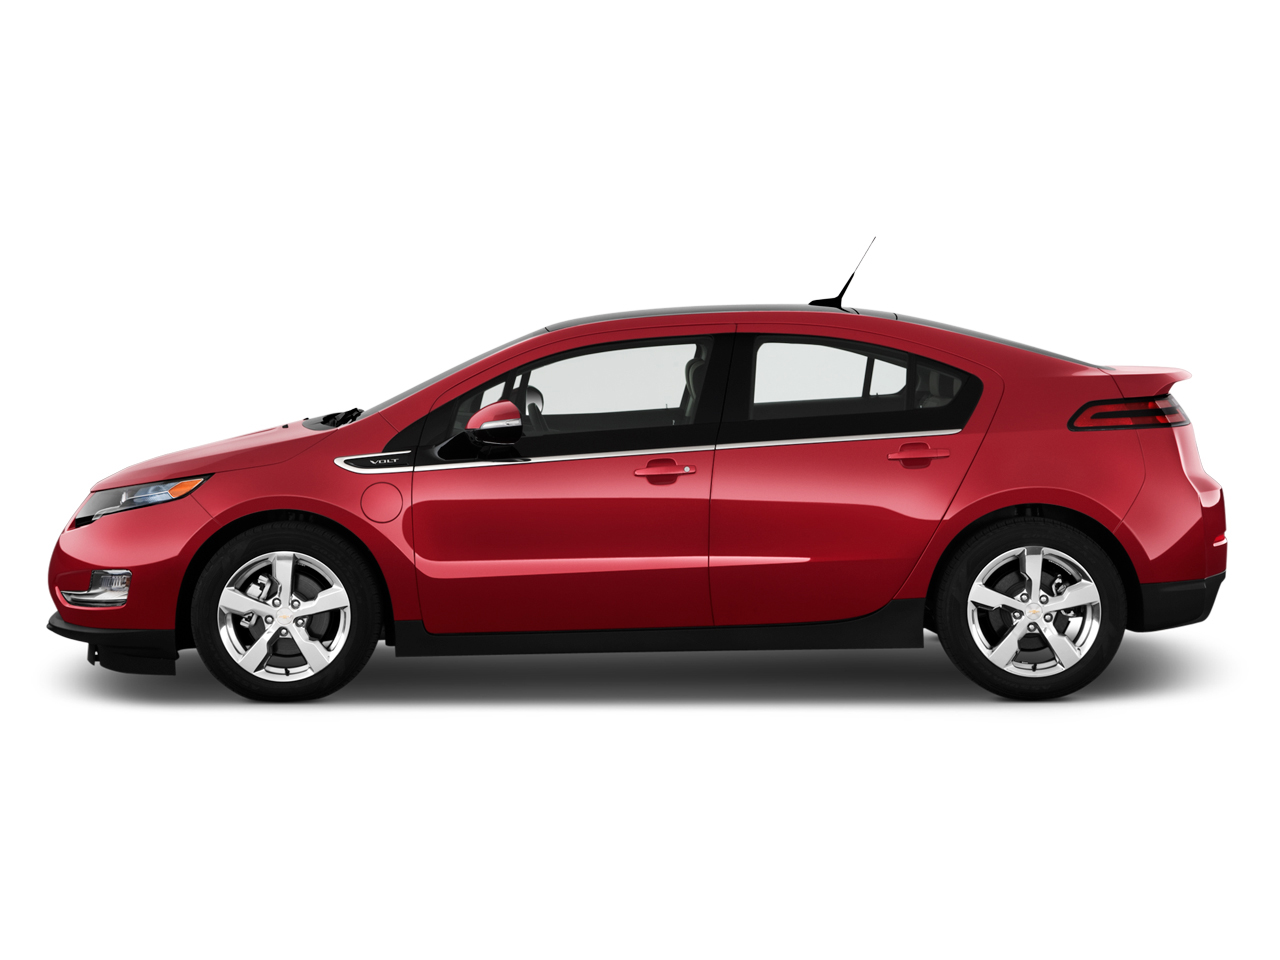 2013 Chevrolet Volt (Chevy) Review, Ratings, Specs, Prices, and Photos -  The Car Connection